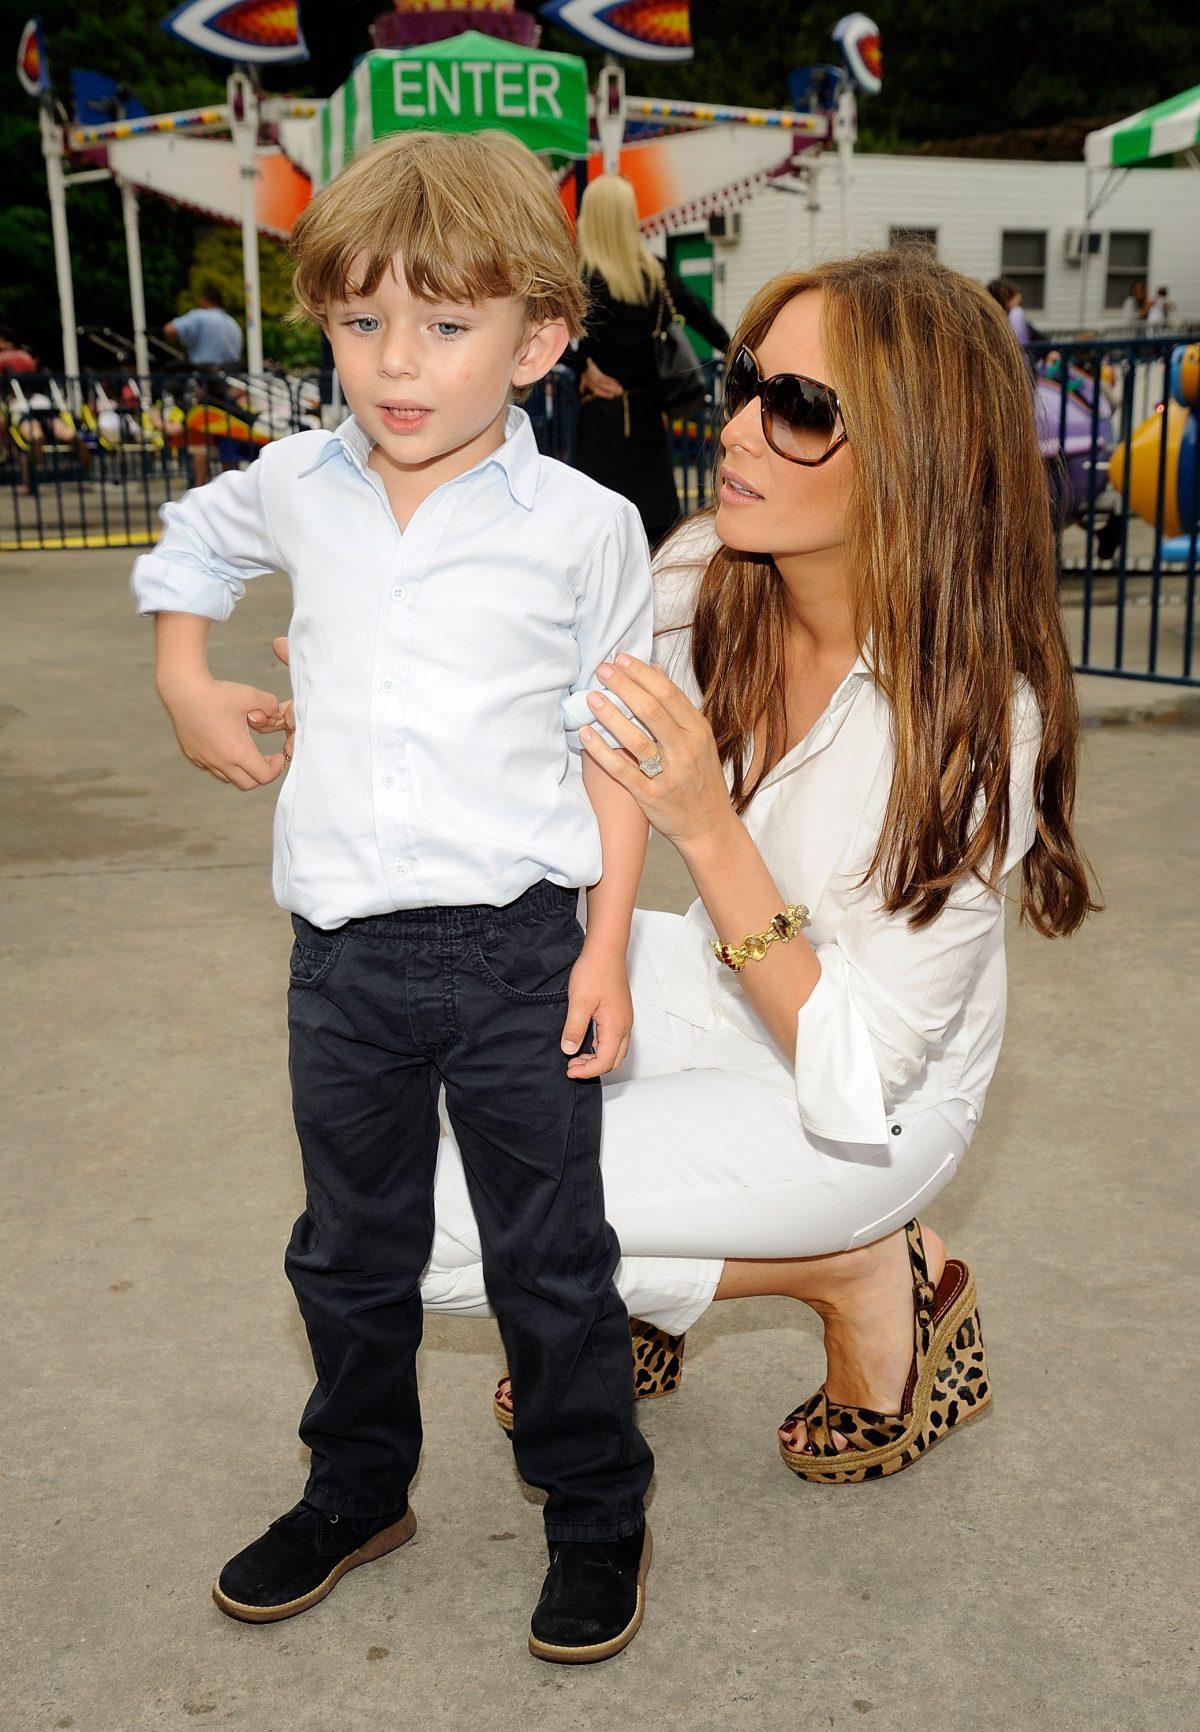 Melania Trump and son Barron Trump attend 3rd Annual Baby Buggy Bedtime Bash at Victorian Gardens at Wollman Rink Central Park on June 2, 2009, in New York City. (Gershoff/Getty Images for Baby Buggy)